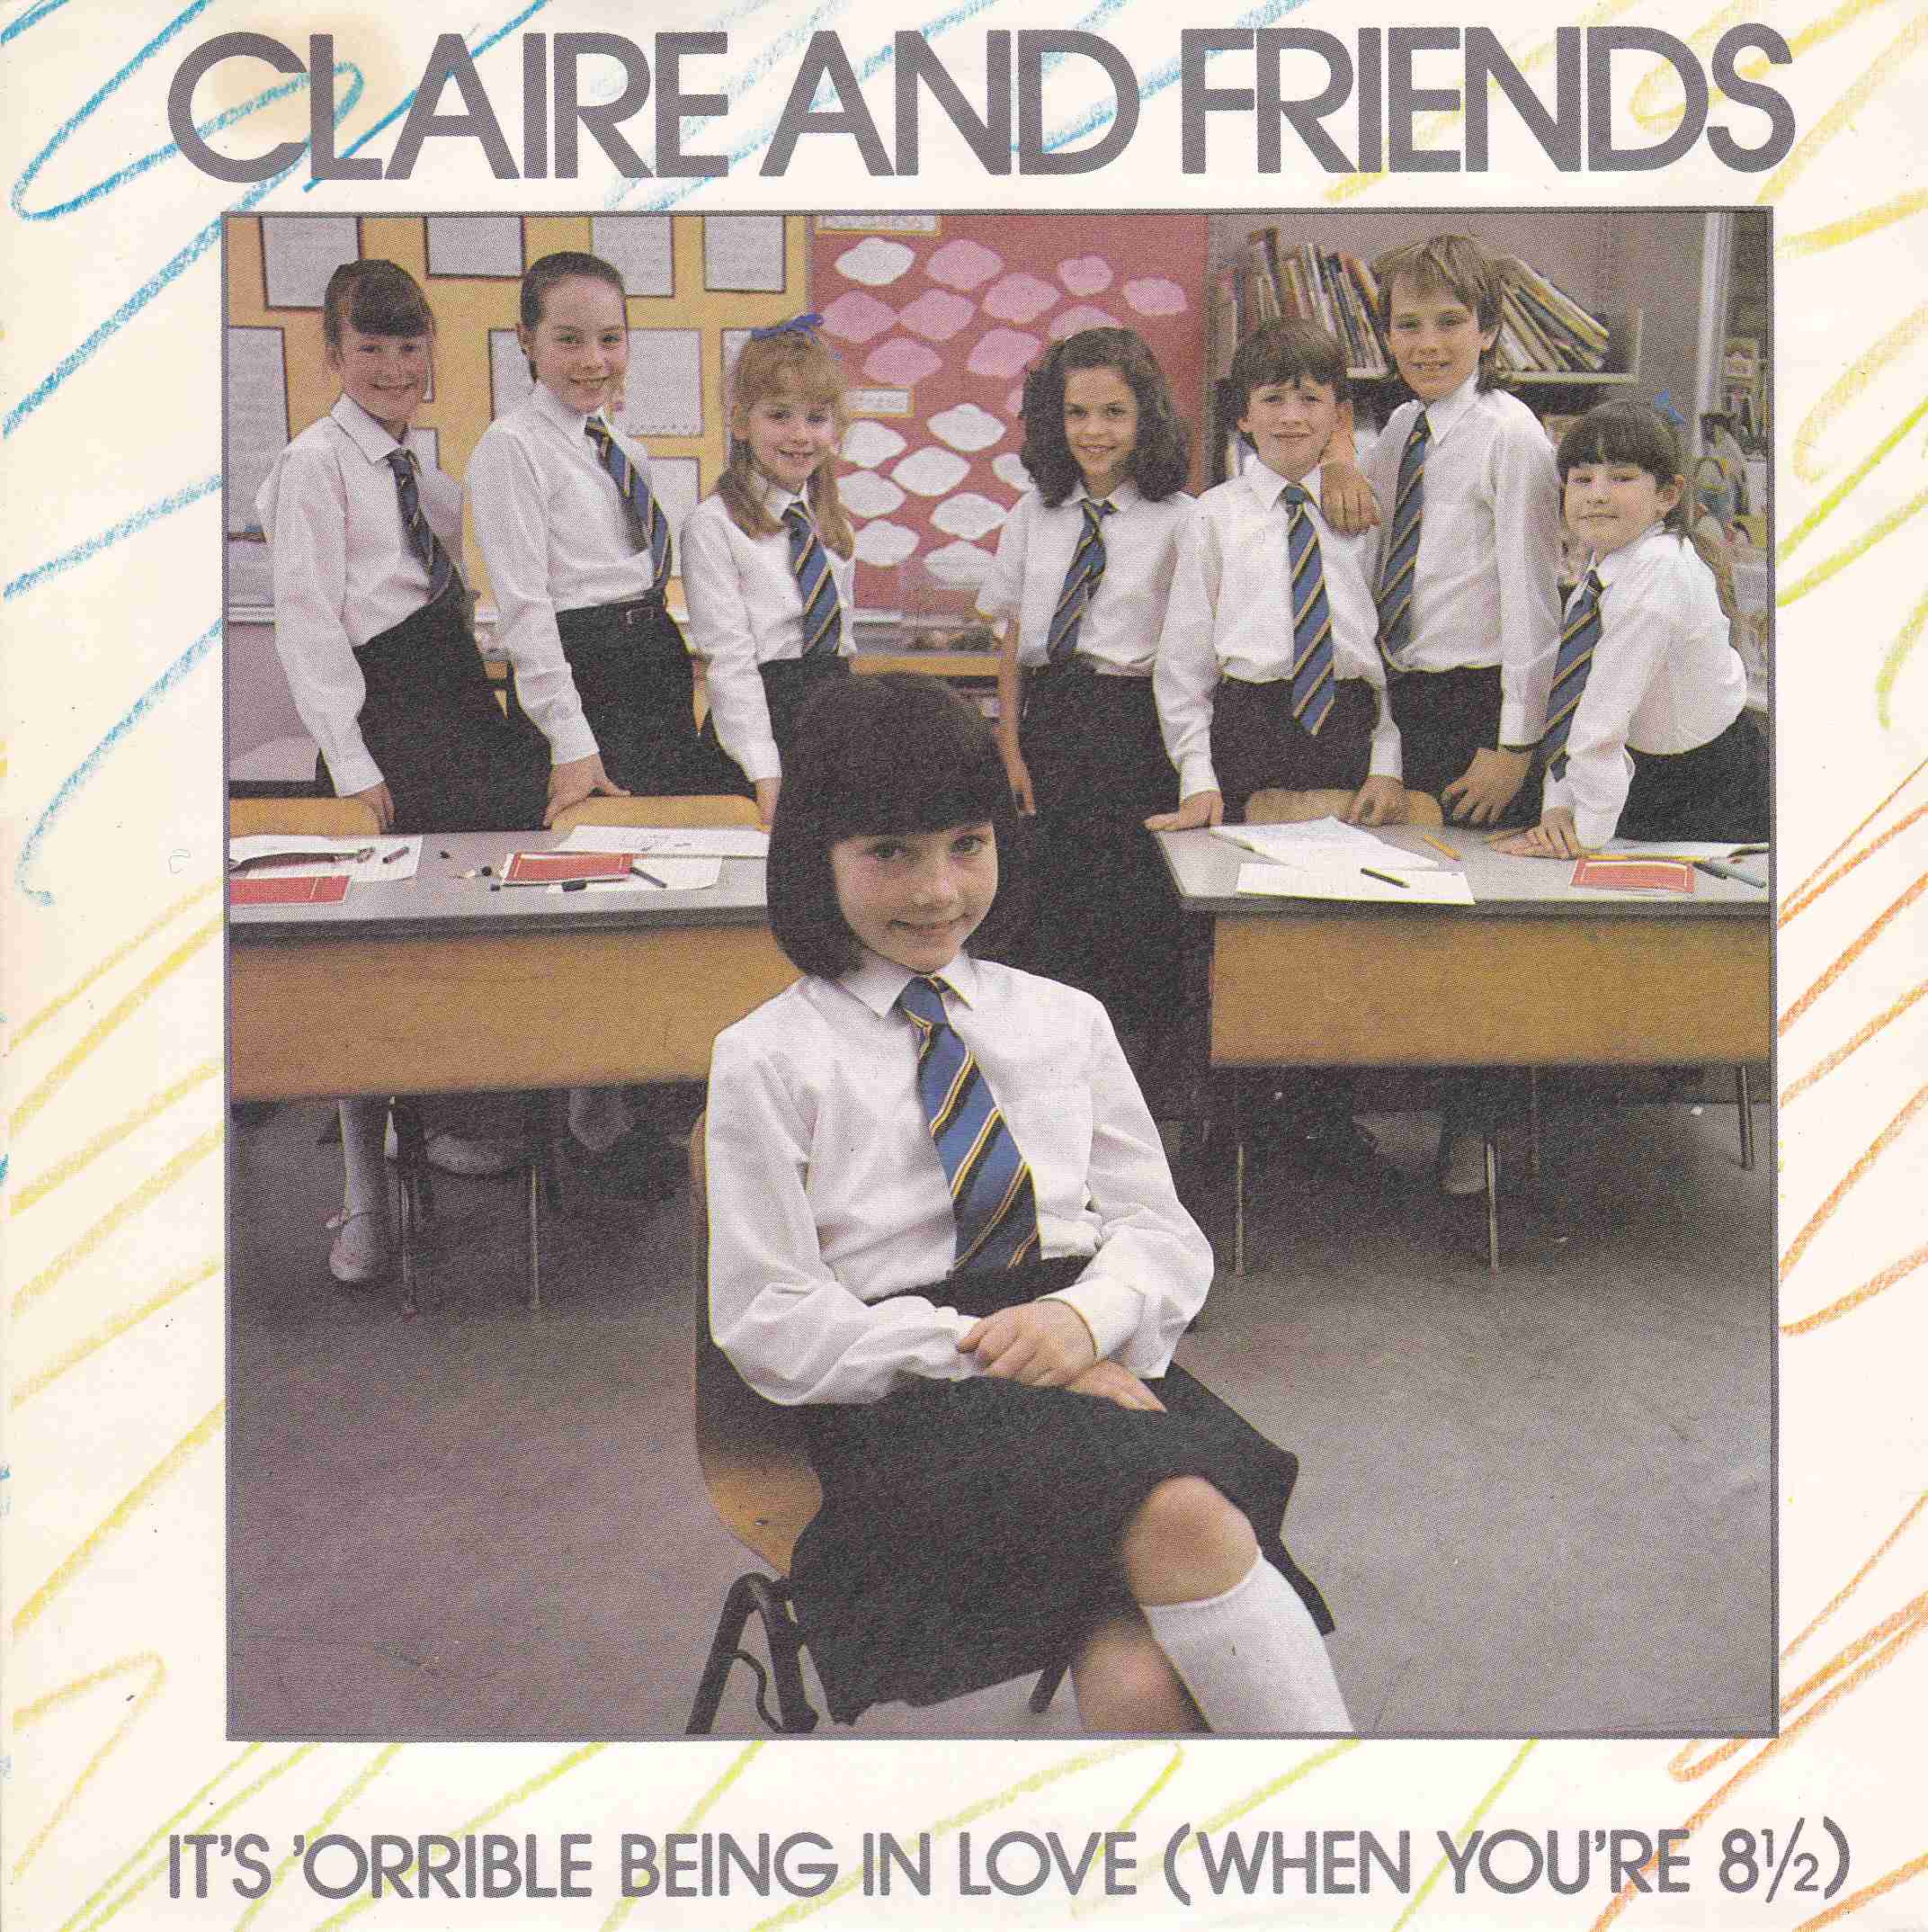 Picture of RESL 189 It's 'orrible being in love (when you're 8 1/2) by artist Claire and Friends (Claire Usher) from the BBC singles - Records and Tapes library